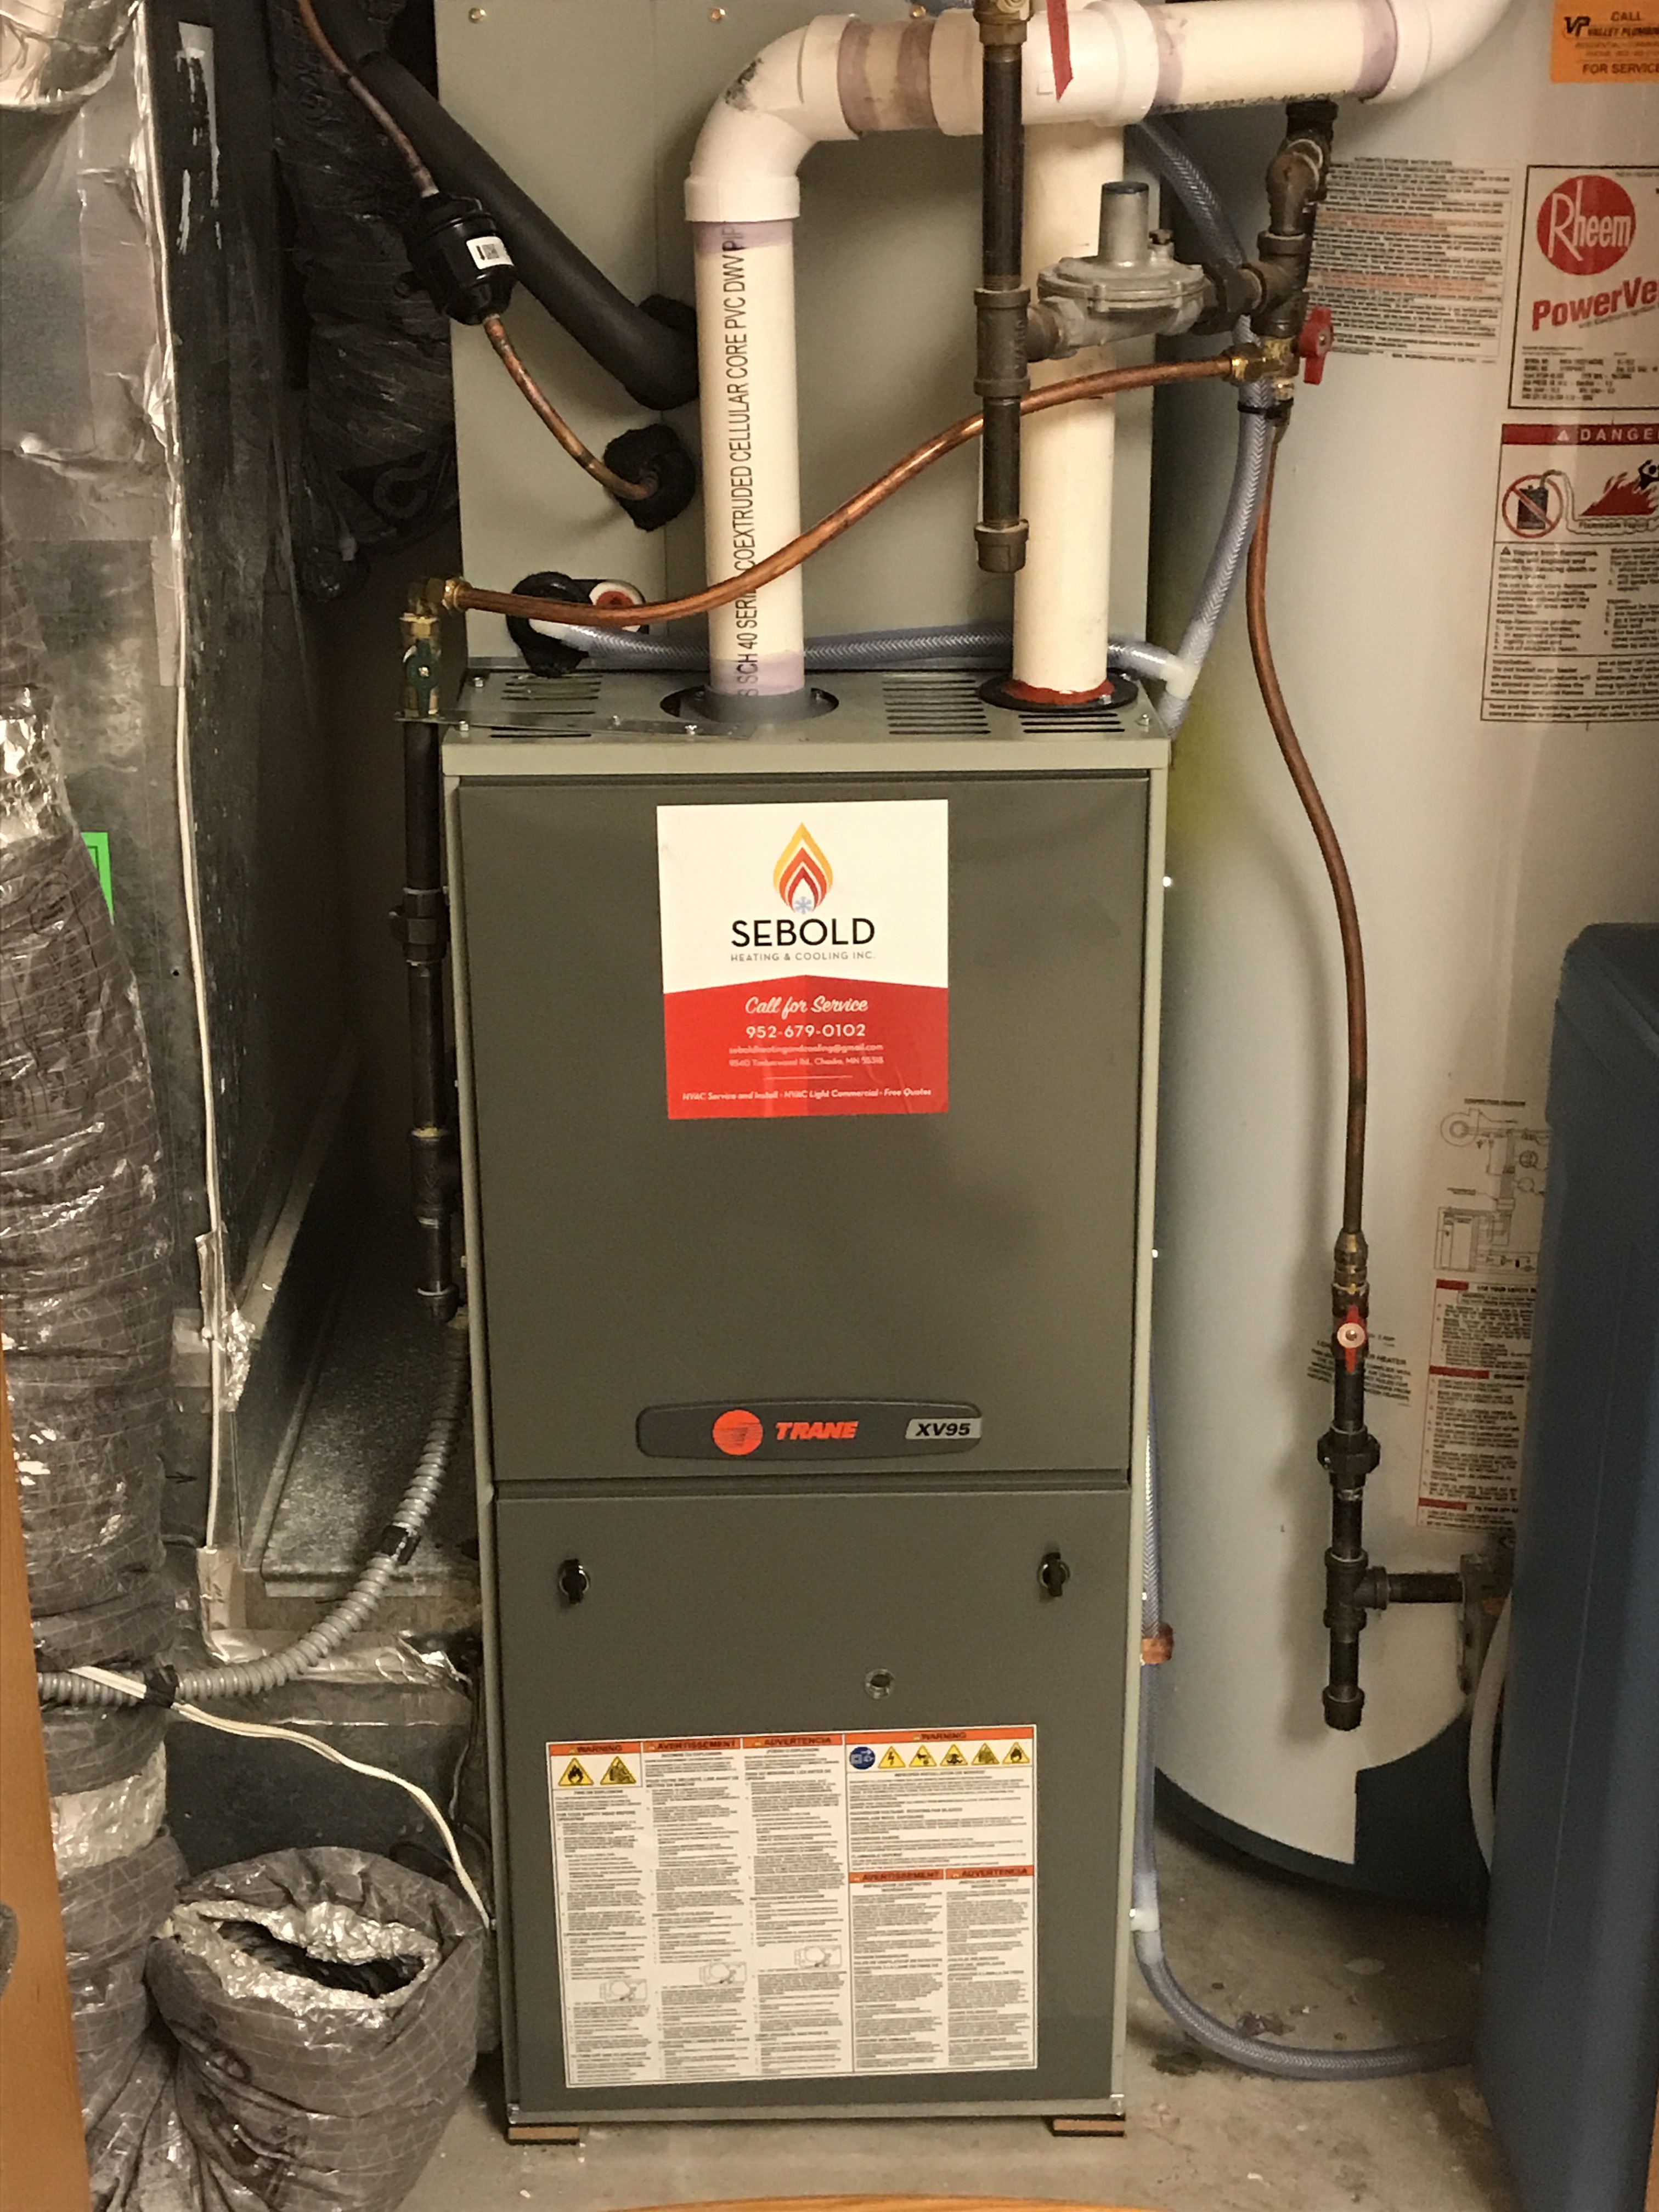 New Furnace and Air Conditoner Install in Chanhassen MN